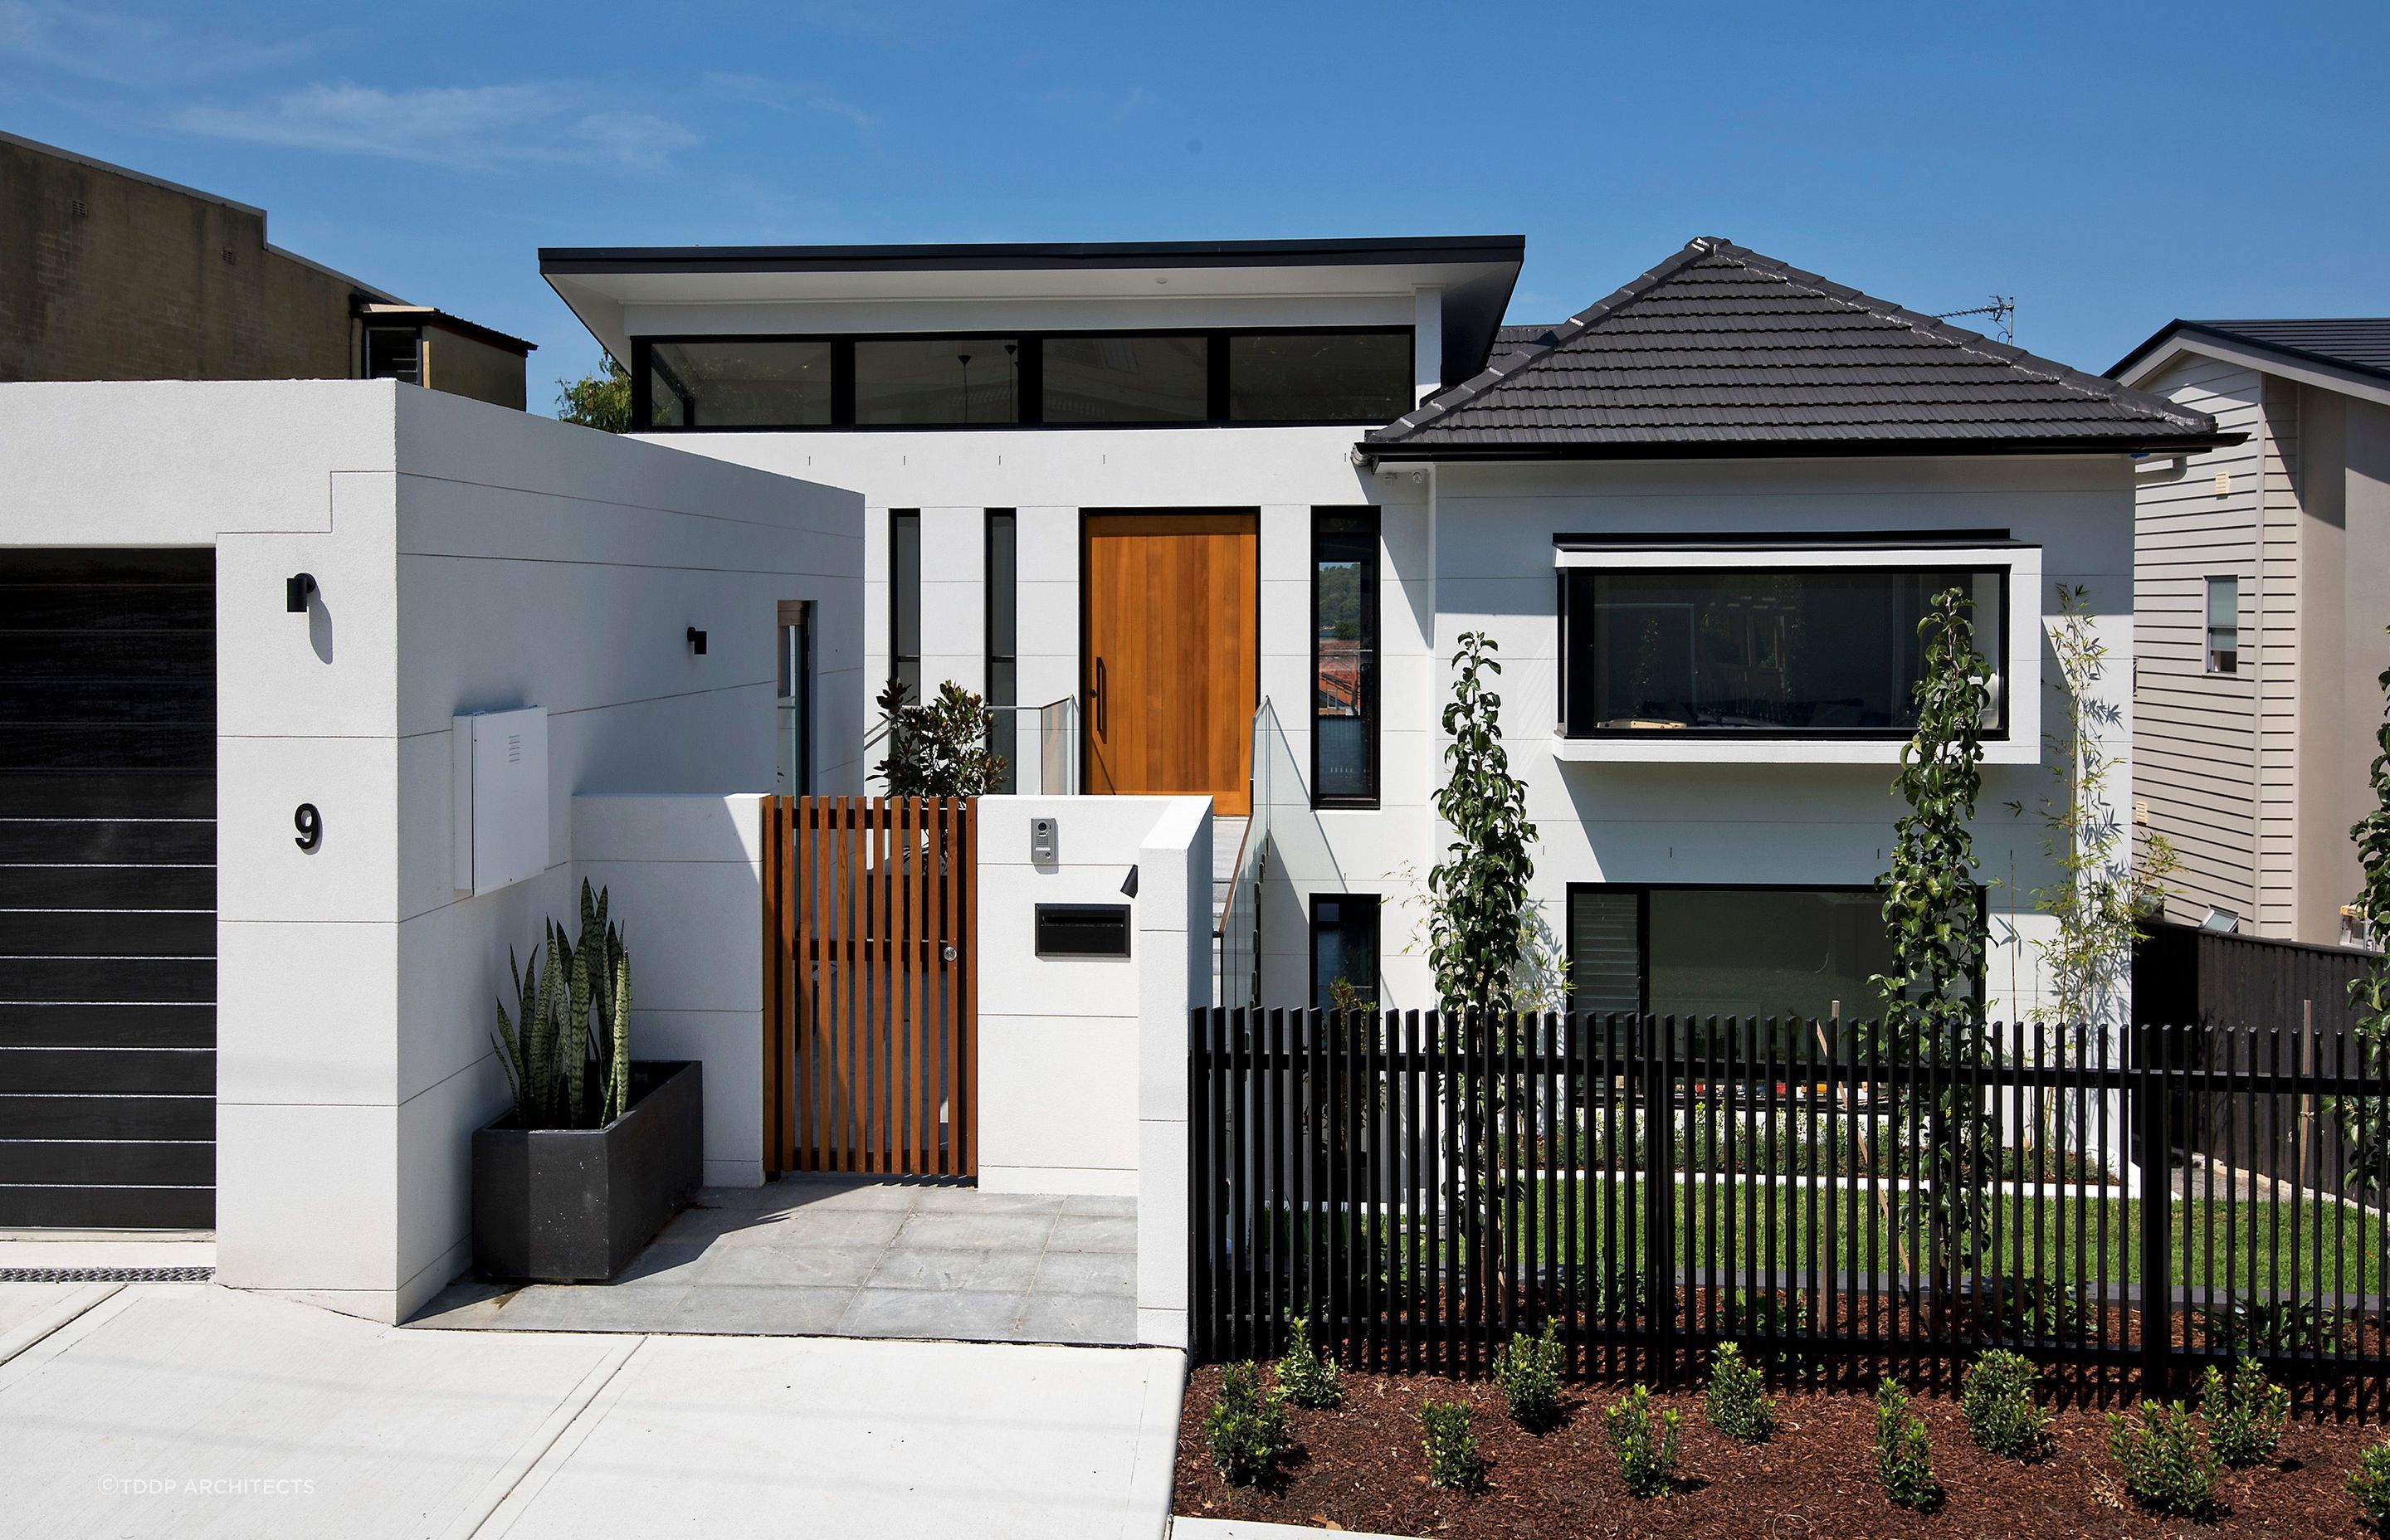 A stylish front gate helps keep your home safe, while increasing its kerb appeal. Featured project: 9L by TDDP Architects